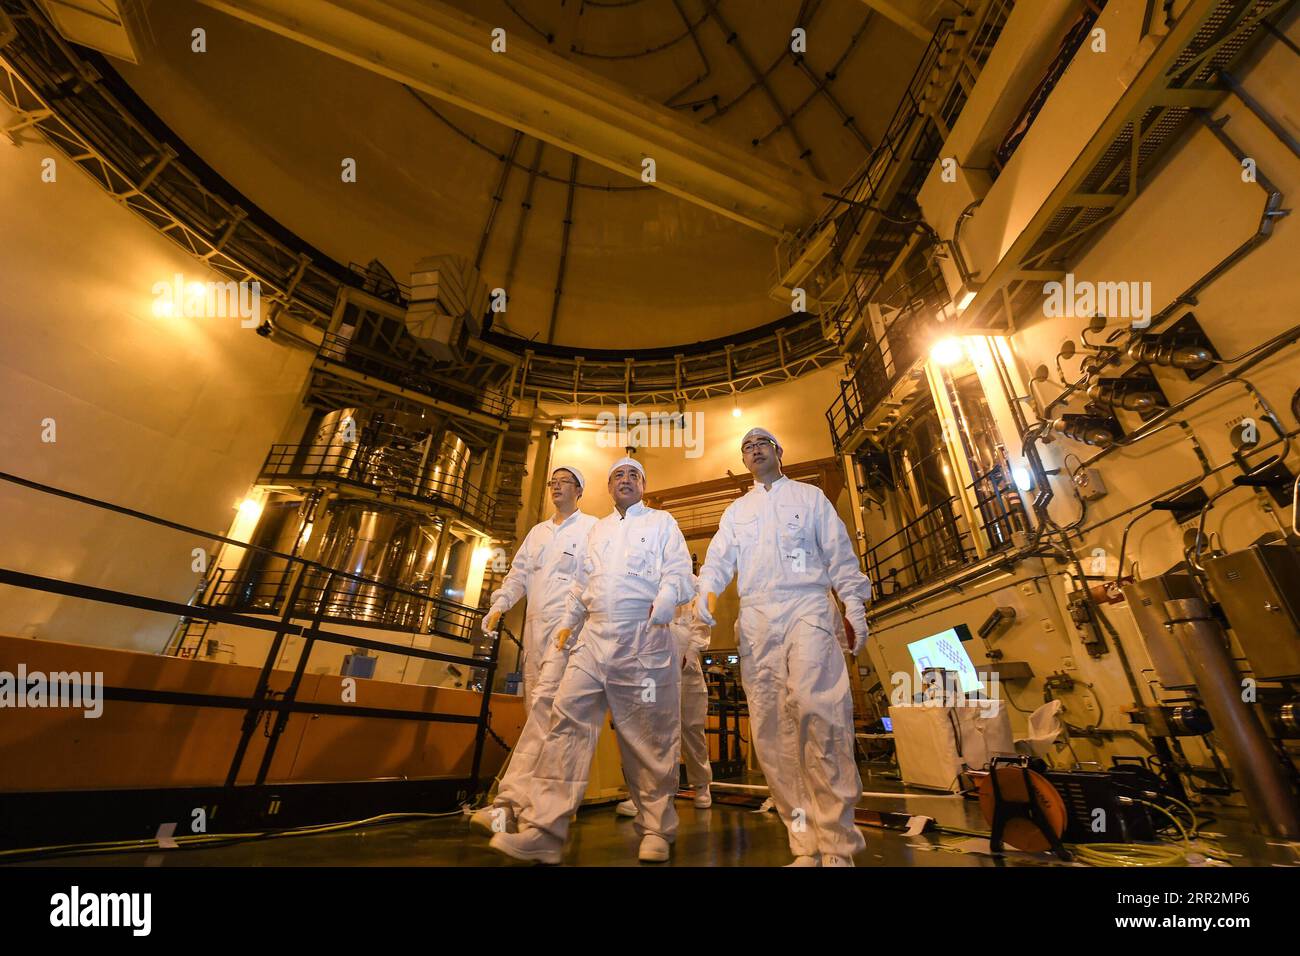 201014 -- SHENZHEN, Oct. 14, 2020 -- Qiao Sukai C and his team leave after finished their work at the Dayawan Nuclear Power Plant in Shenzhen, south China s Guangdong Province, April 12, 2019. Every 18 months, the Dayawan Nuclear Power Plant has to undergo a fuel assemblies replacement, which is one of the most important moments for the nuclear power plant. Dozens of engineers are divided into four shifts and operate the equipment day and night when the reactor is shut down. Their leader, Qiao Sukai, has been dealing with nuclear fuel since July 1993 when the nuclear fuel assembly of Dayawan N Stock Photo